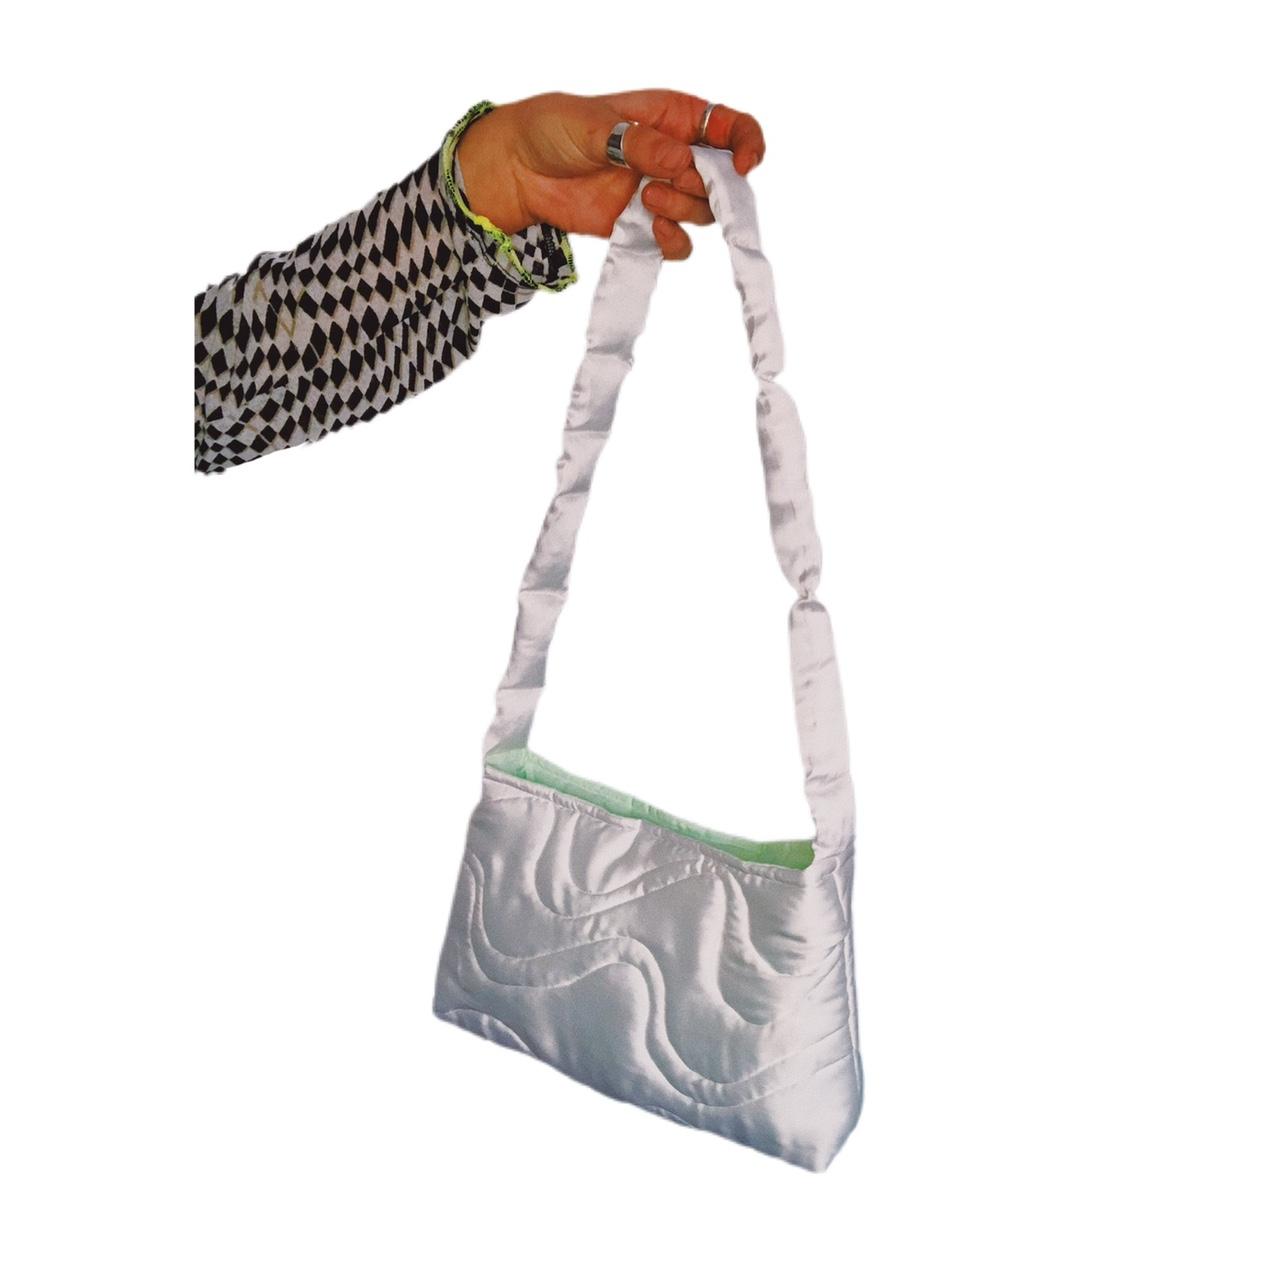 Women's Green and Silver Bag (2)